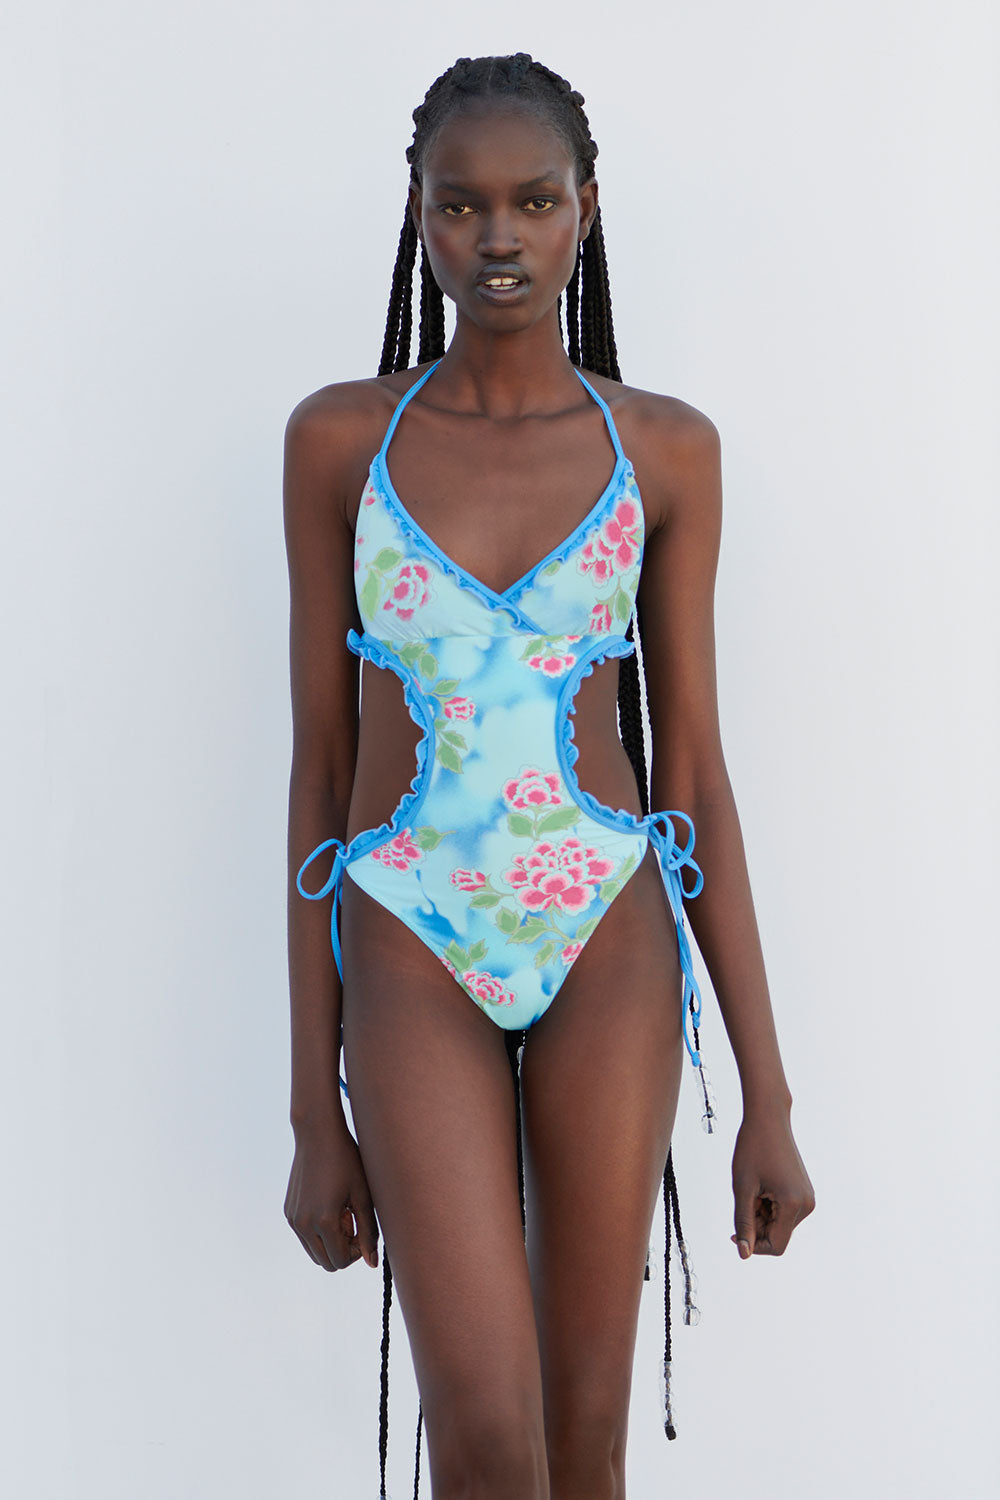 Floral Swimsuits, Swimming Costumes in Floral Prints